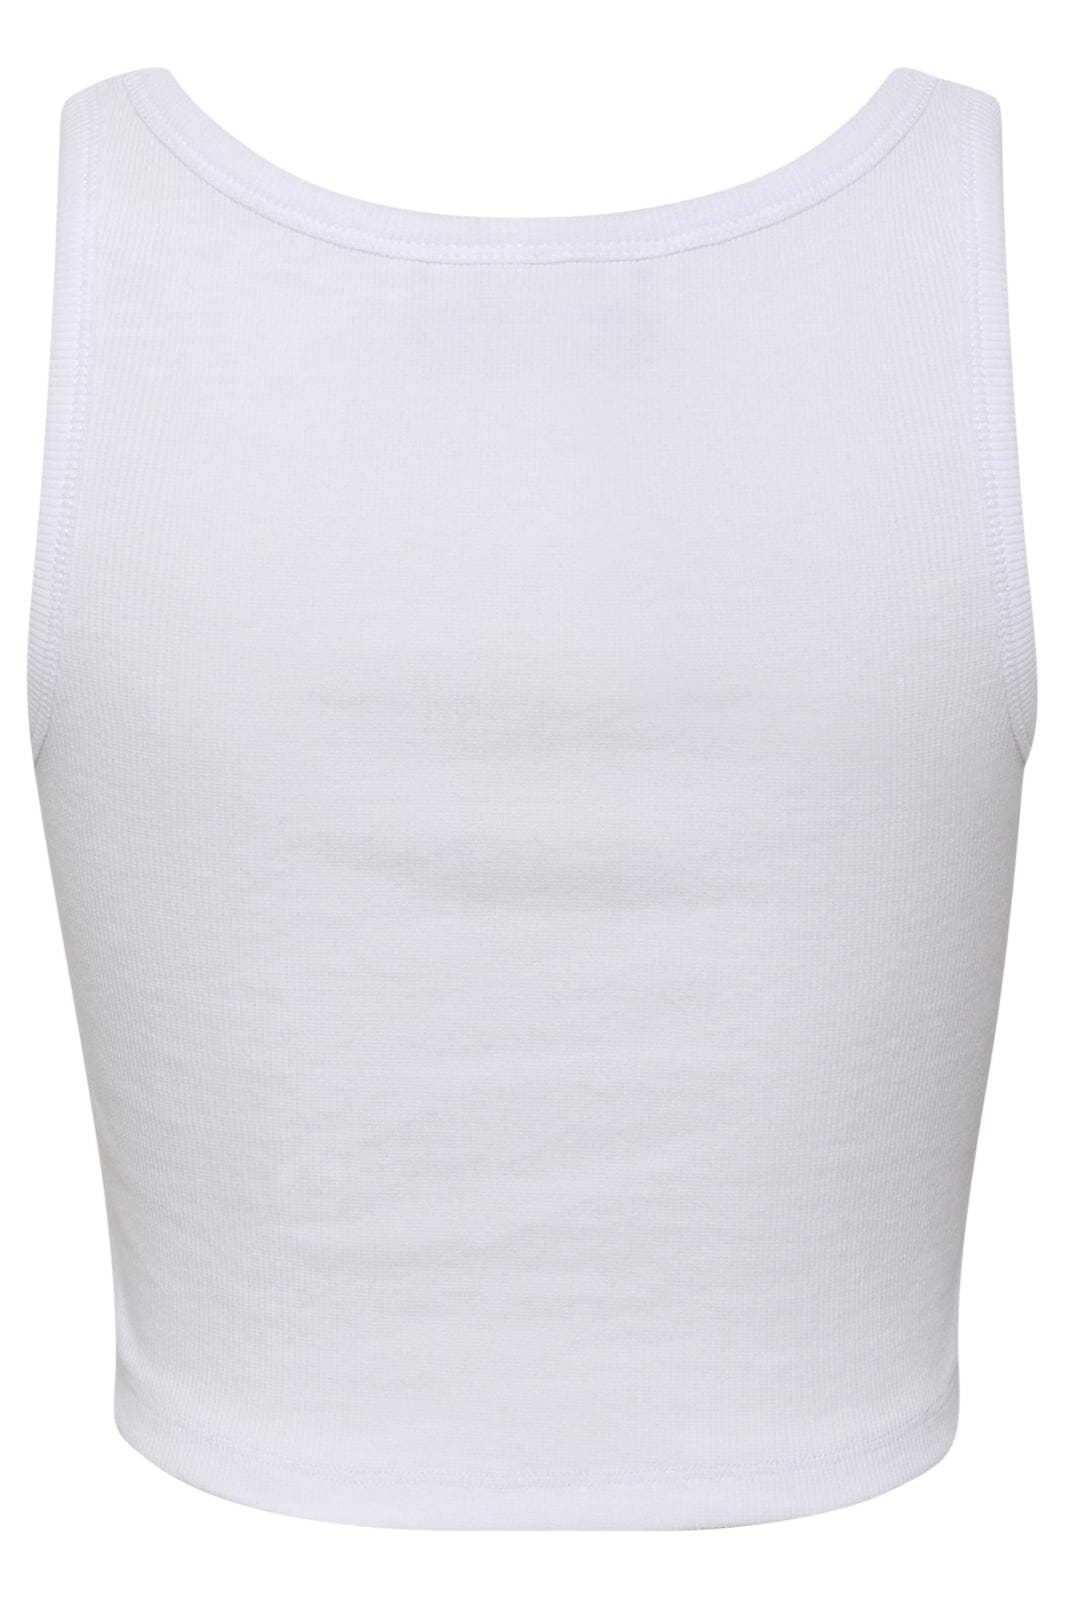 Gestuz - DrewGZ cropped top - Bright White Toppe 